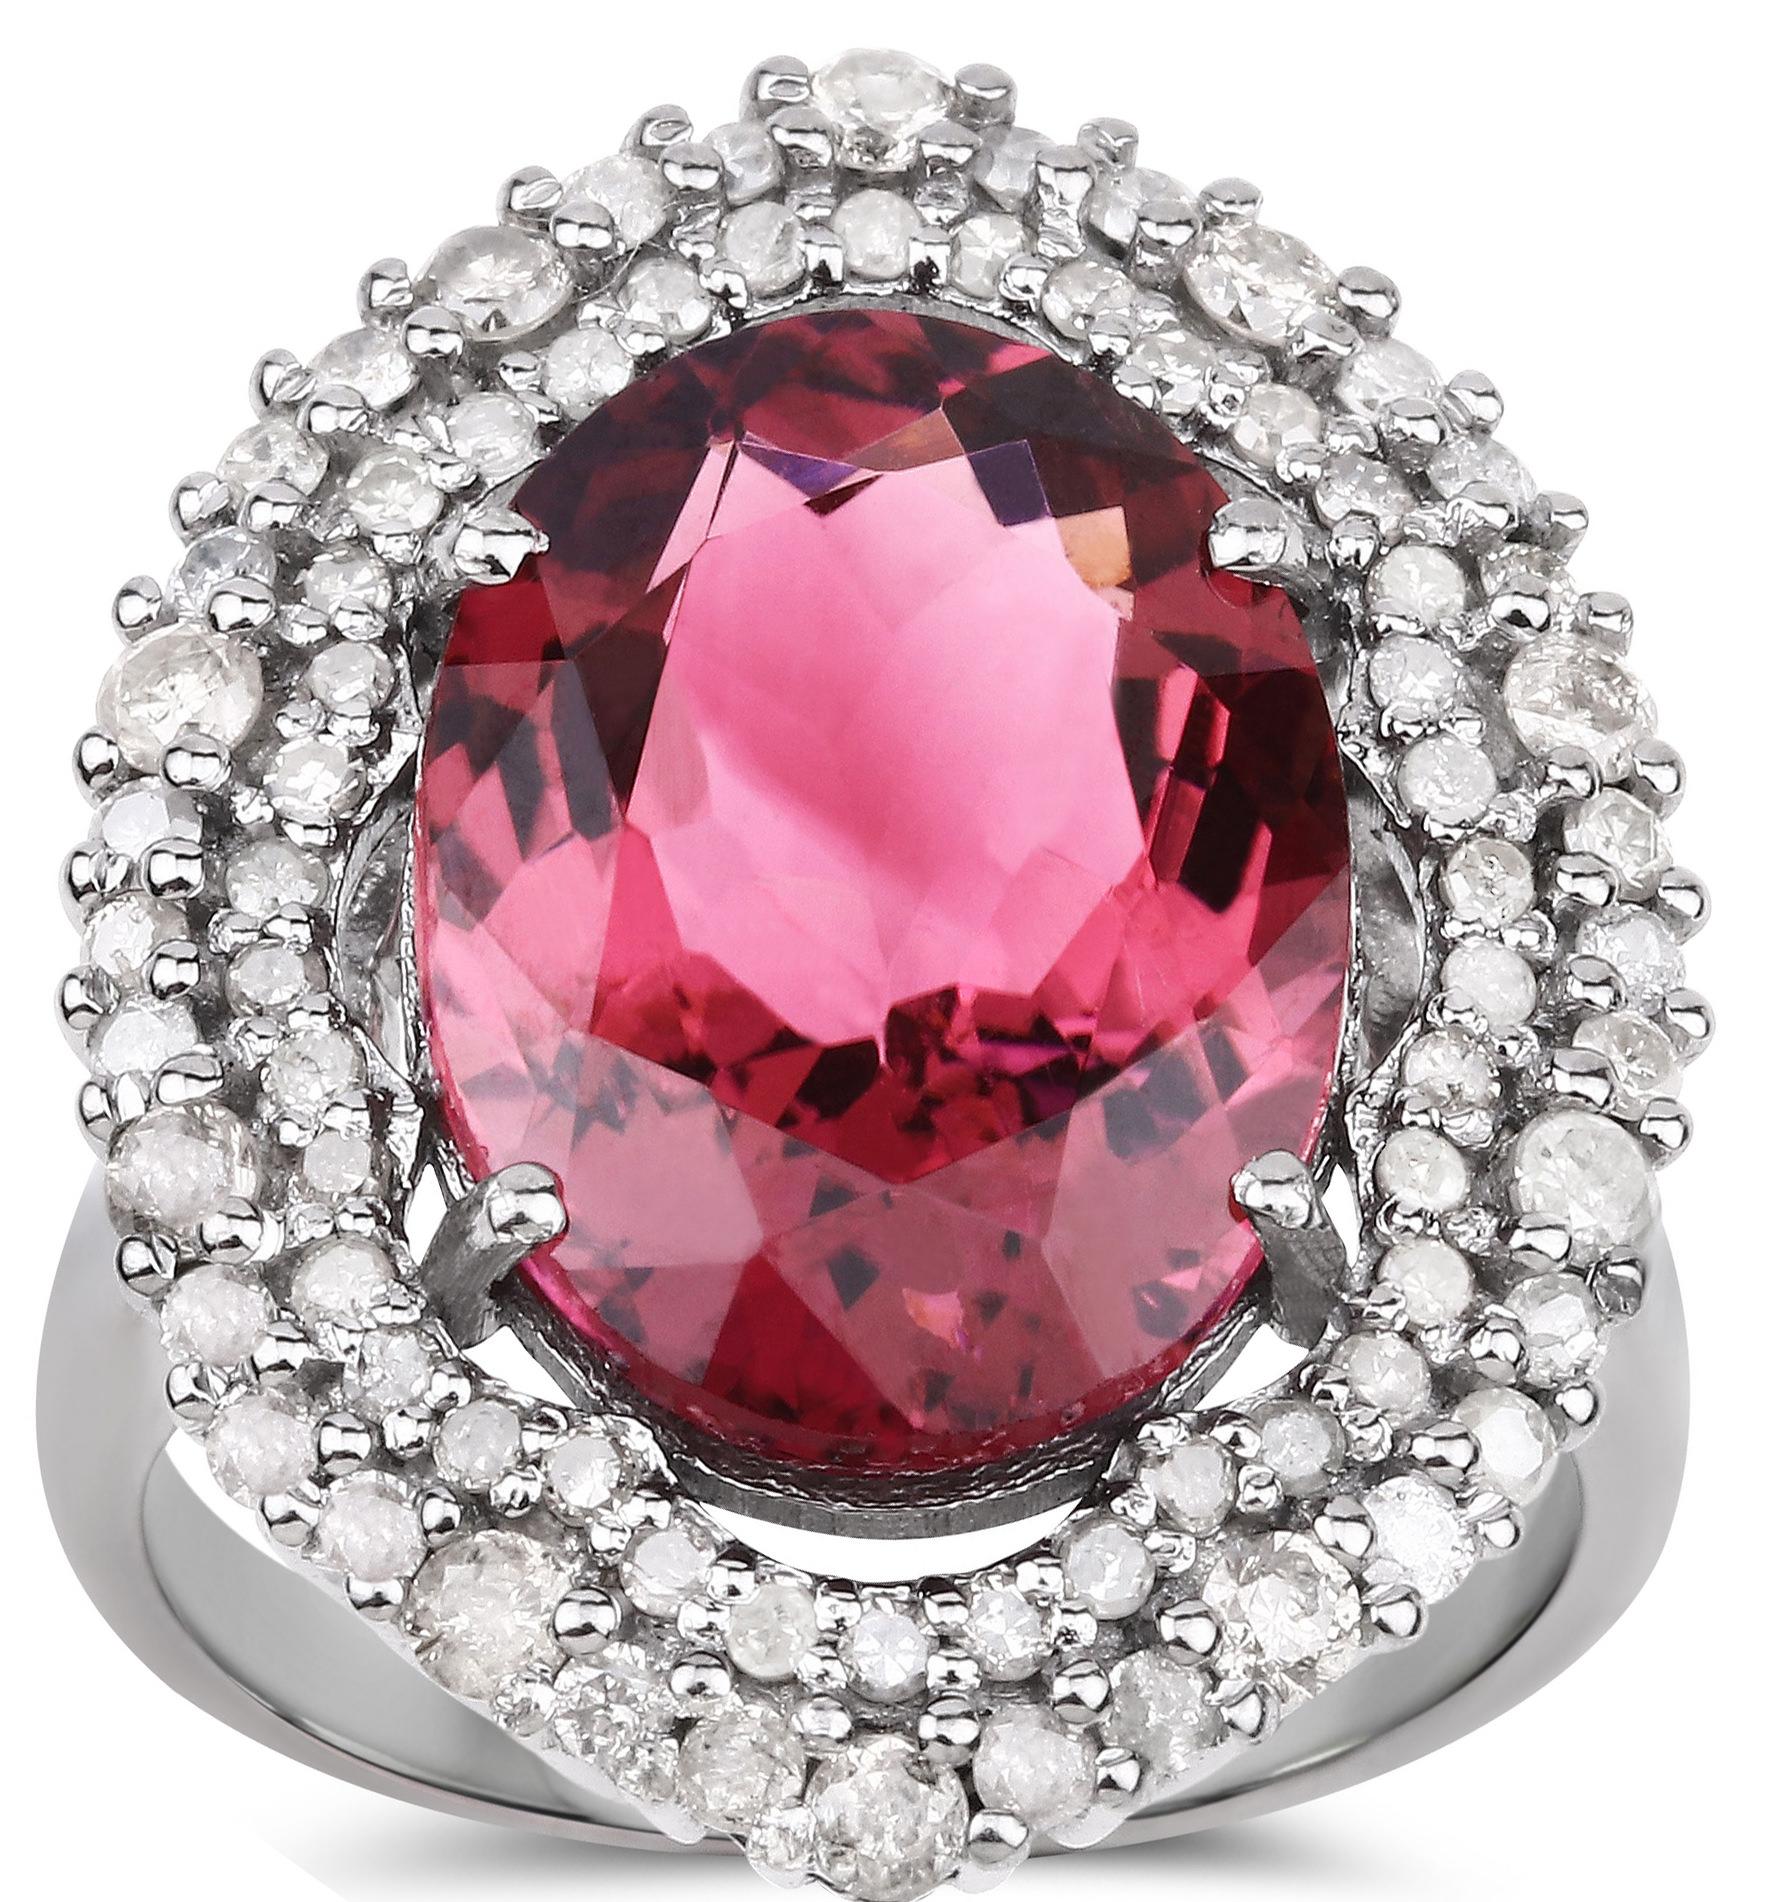 Oval Cut Natural Pink Tourmaline Statement Ring With Diamonds 9 Carats Total